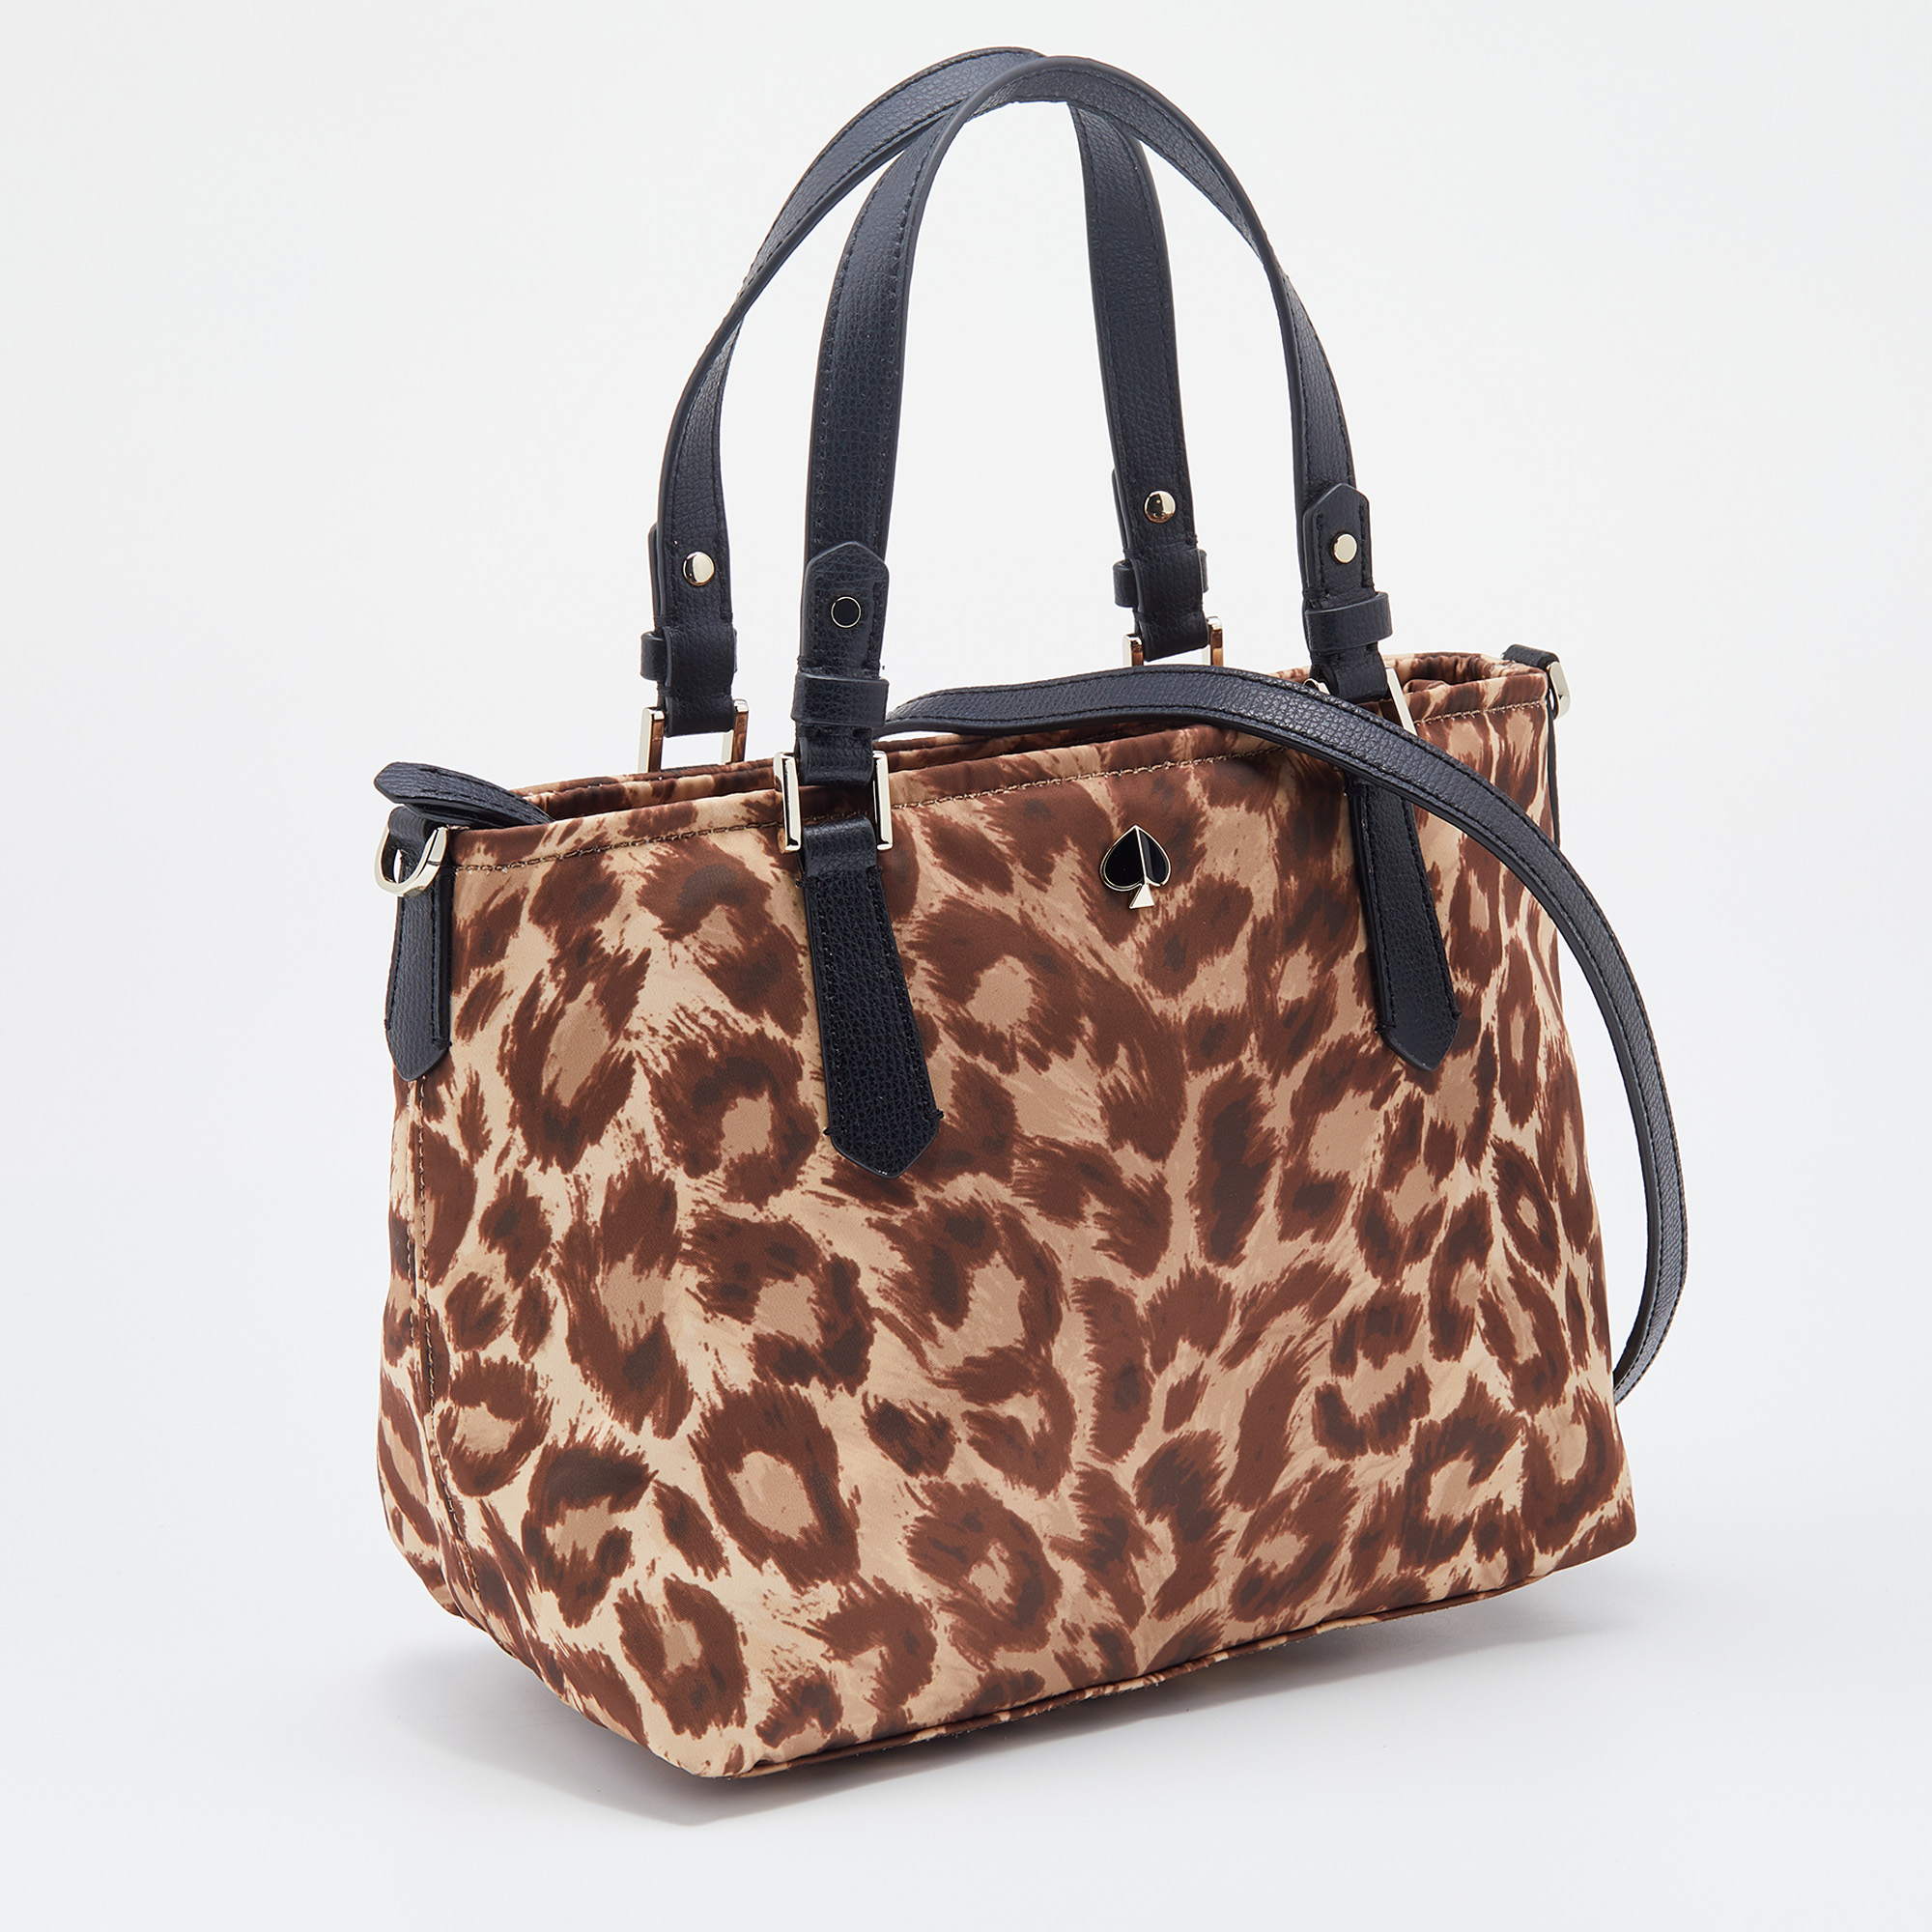 Kate Spade Brown/Black Animal Print Fabric And Leather Tote